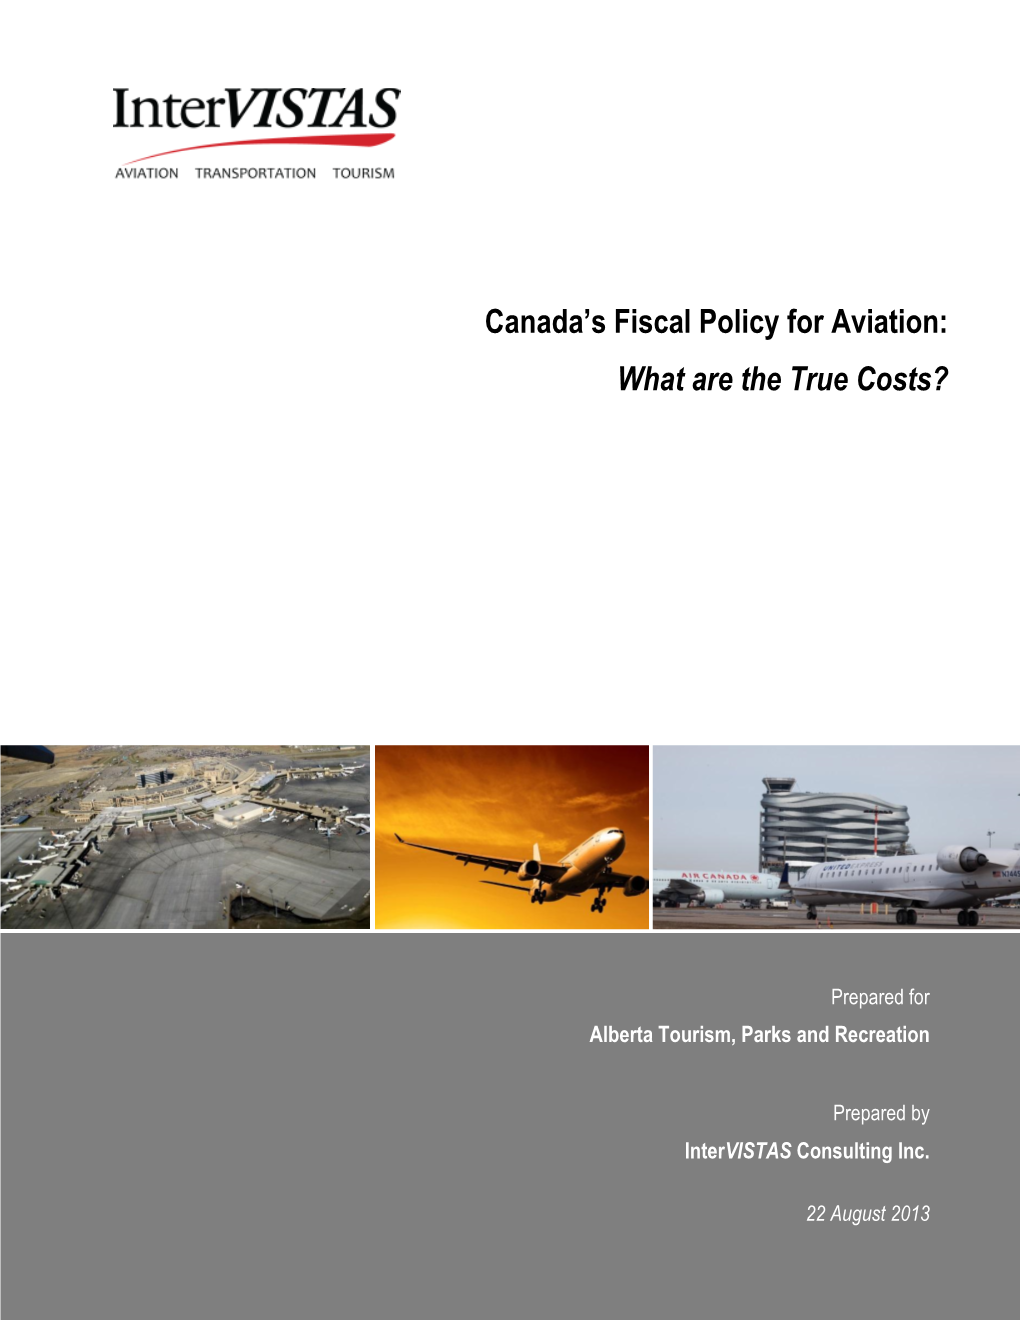 Canada's Fiscal Policy for Aviation: What Are the True Costs?